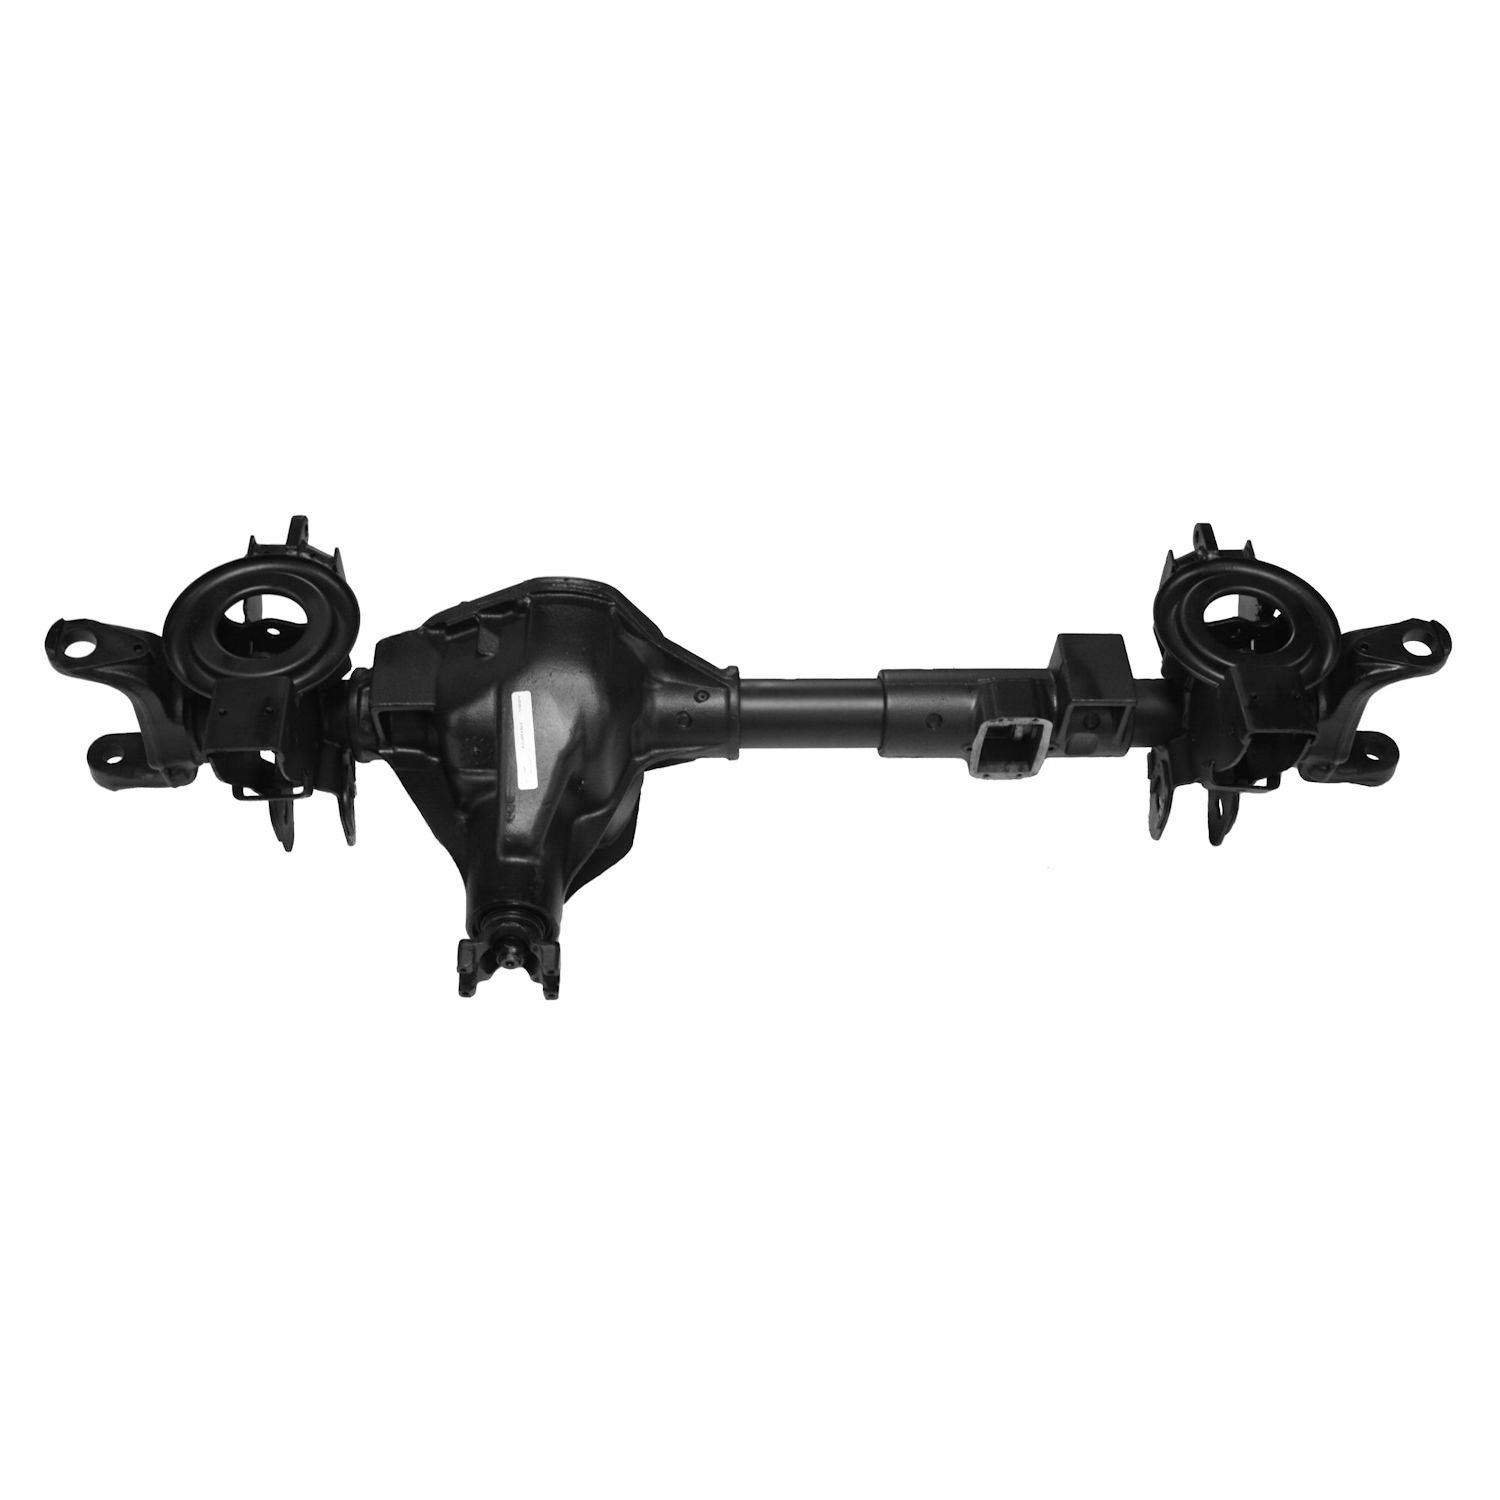 Remanufactured Complete Axle Assy for Dana 60 1998